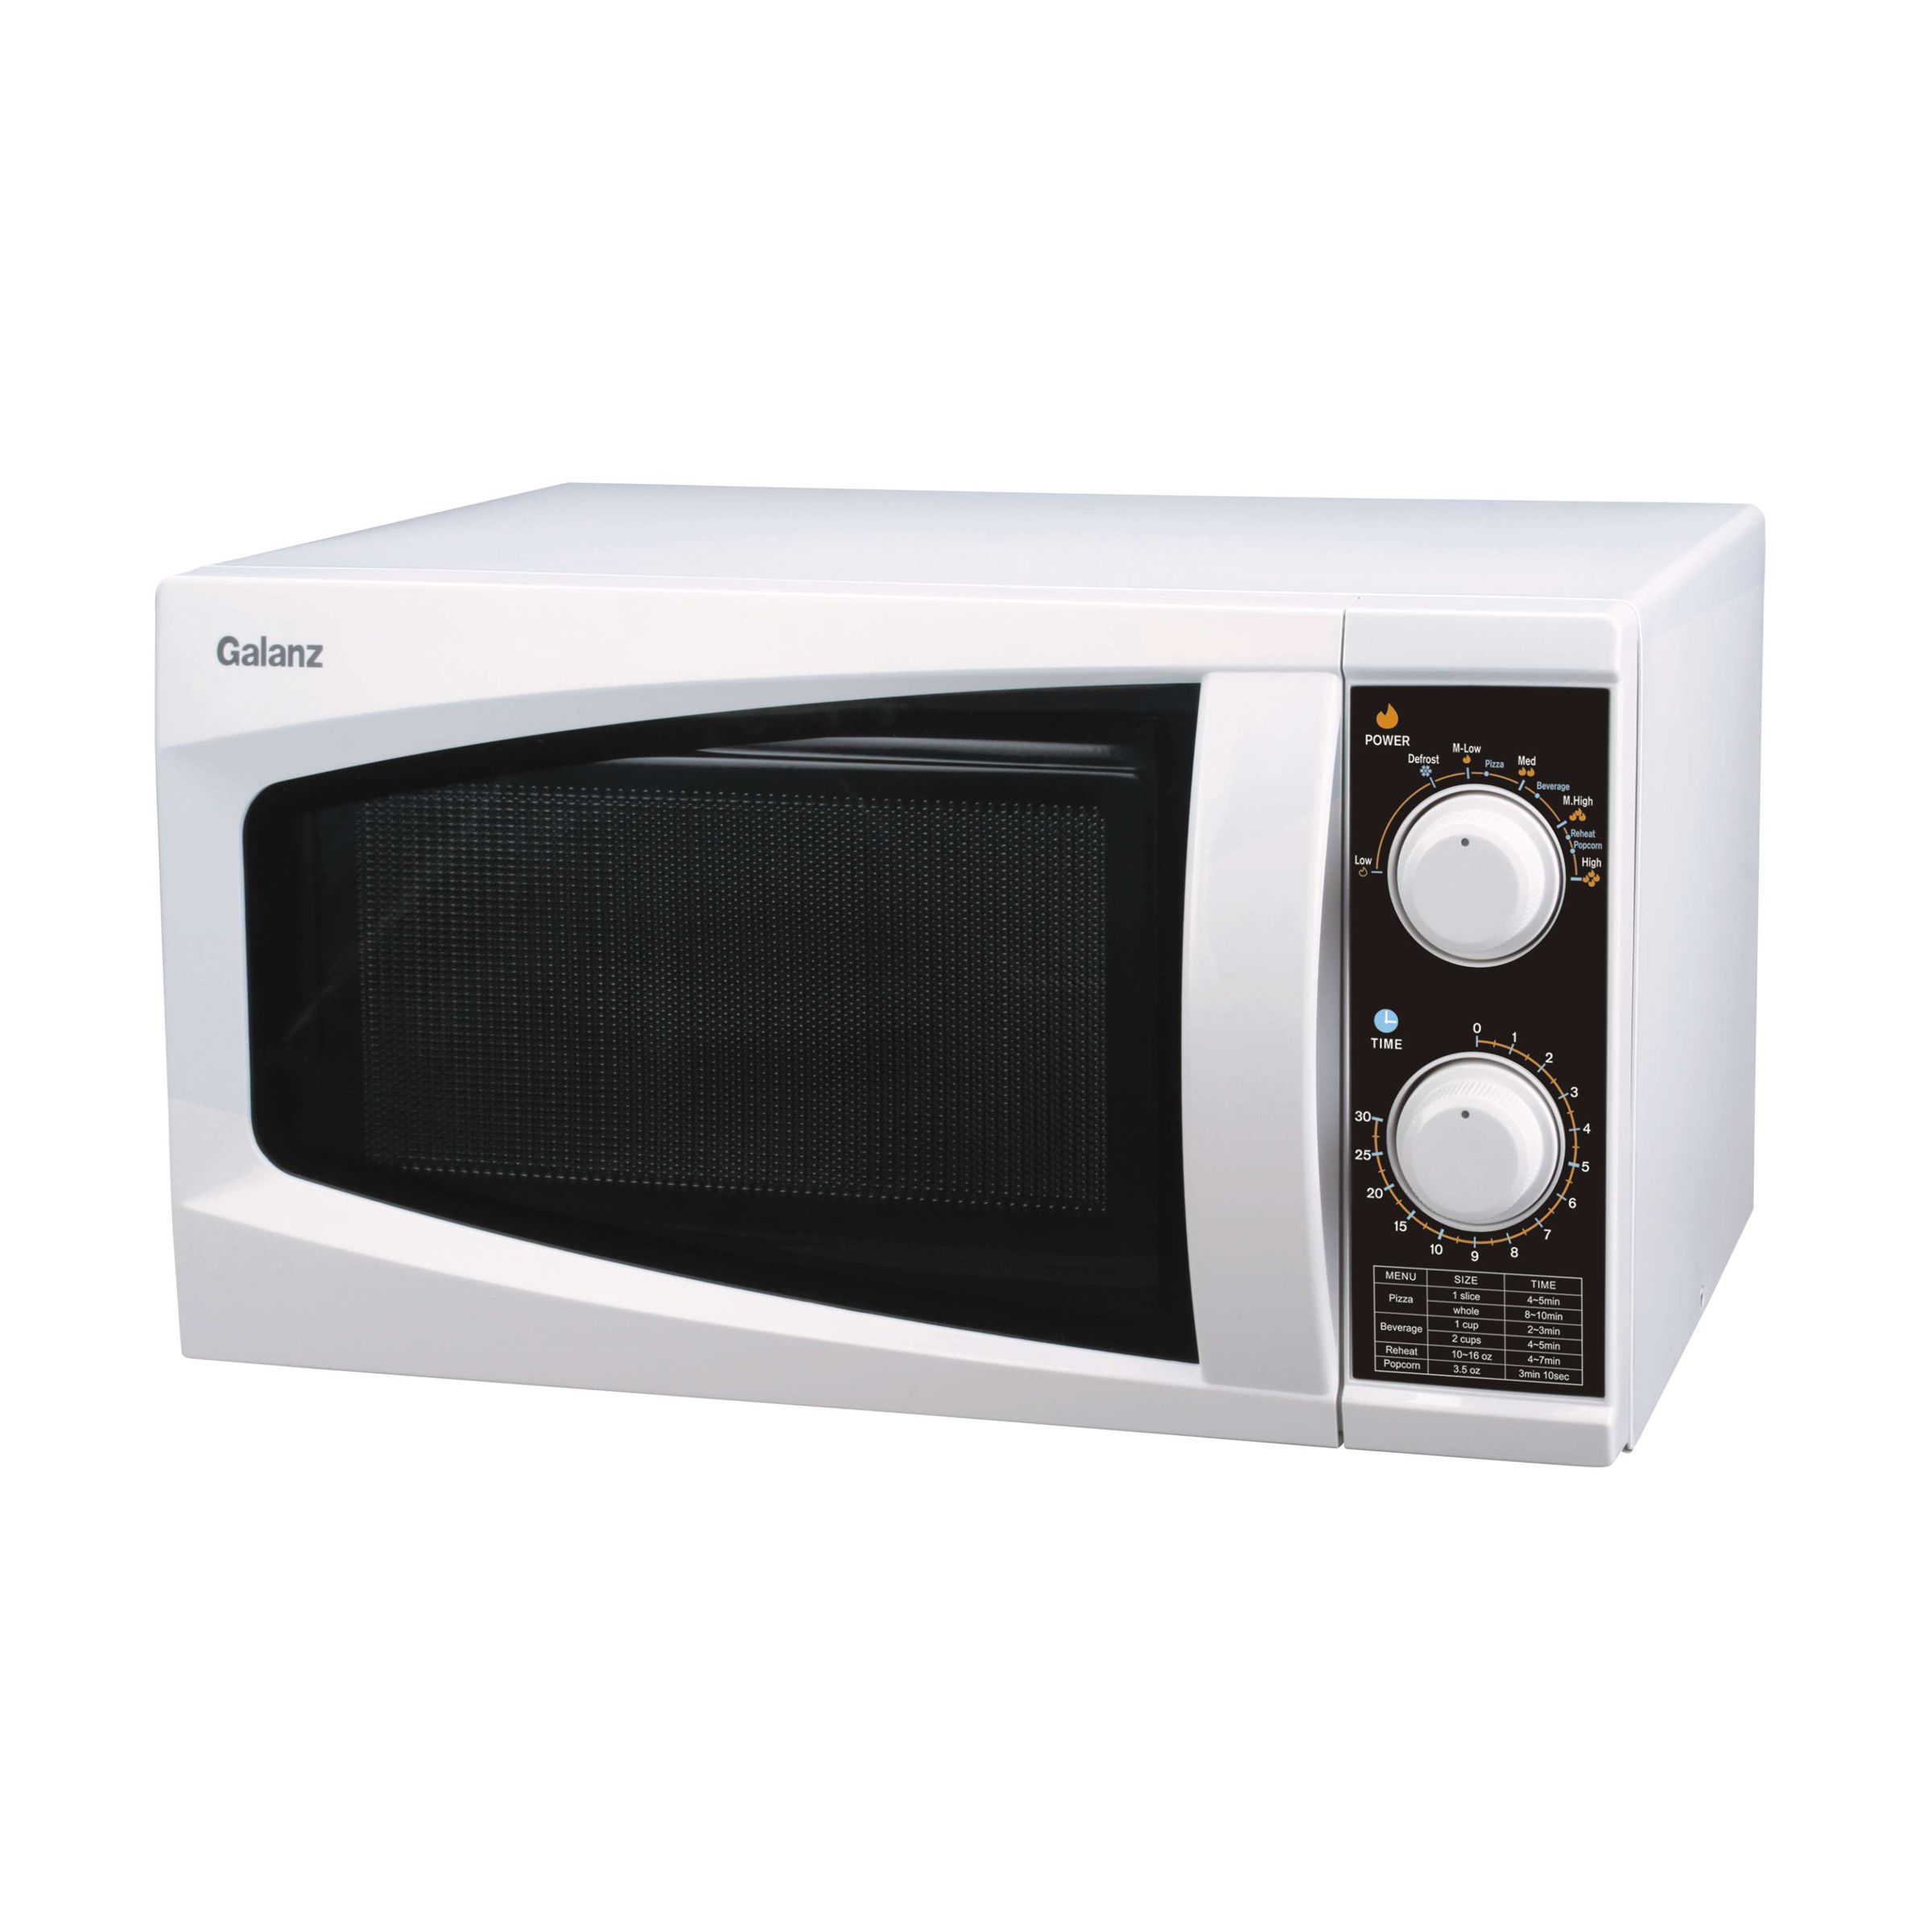 Galanz 0.6 Cubic Foot 600 Watt Microwave Oven WP700L17-8 | Shop Your